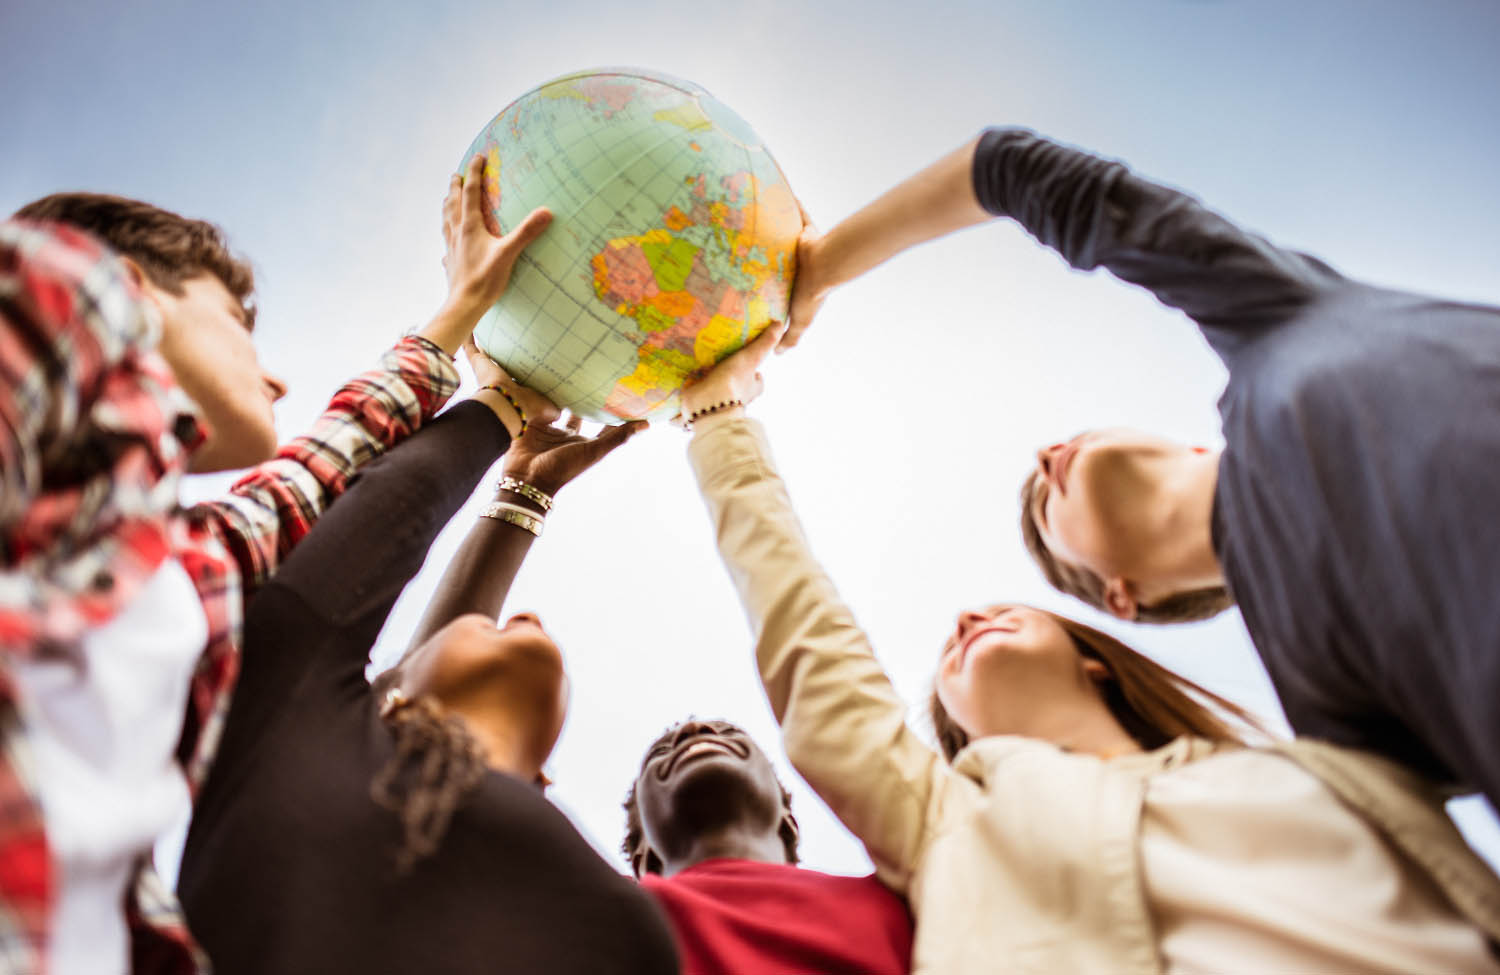 group of diverse people uplift a globe of the earth